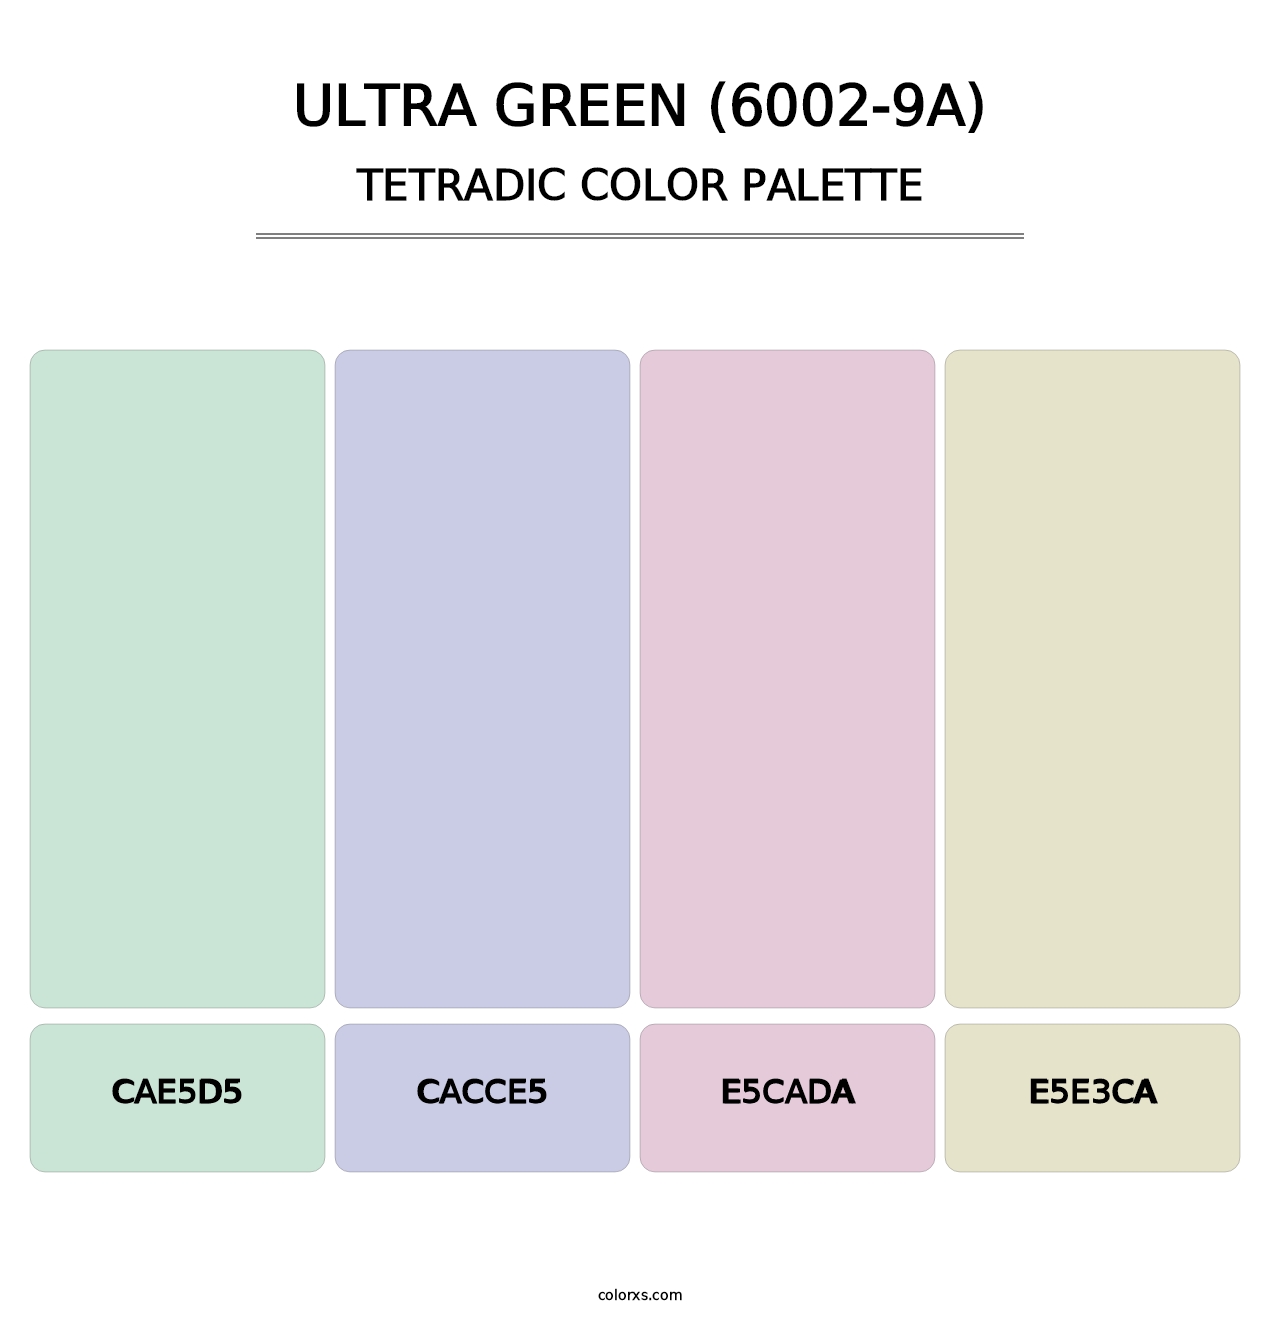 Ultra Green (6002-9A) - Tetradic Color Palette